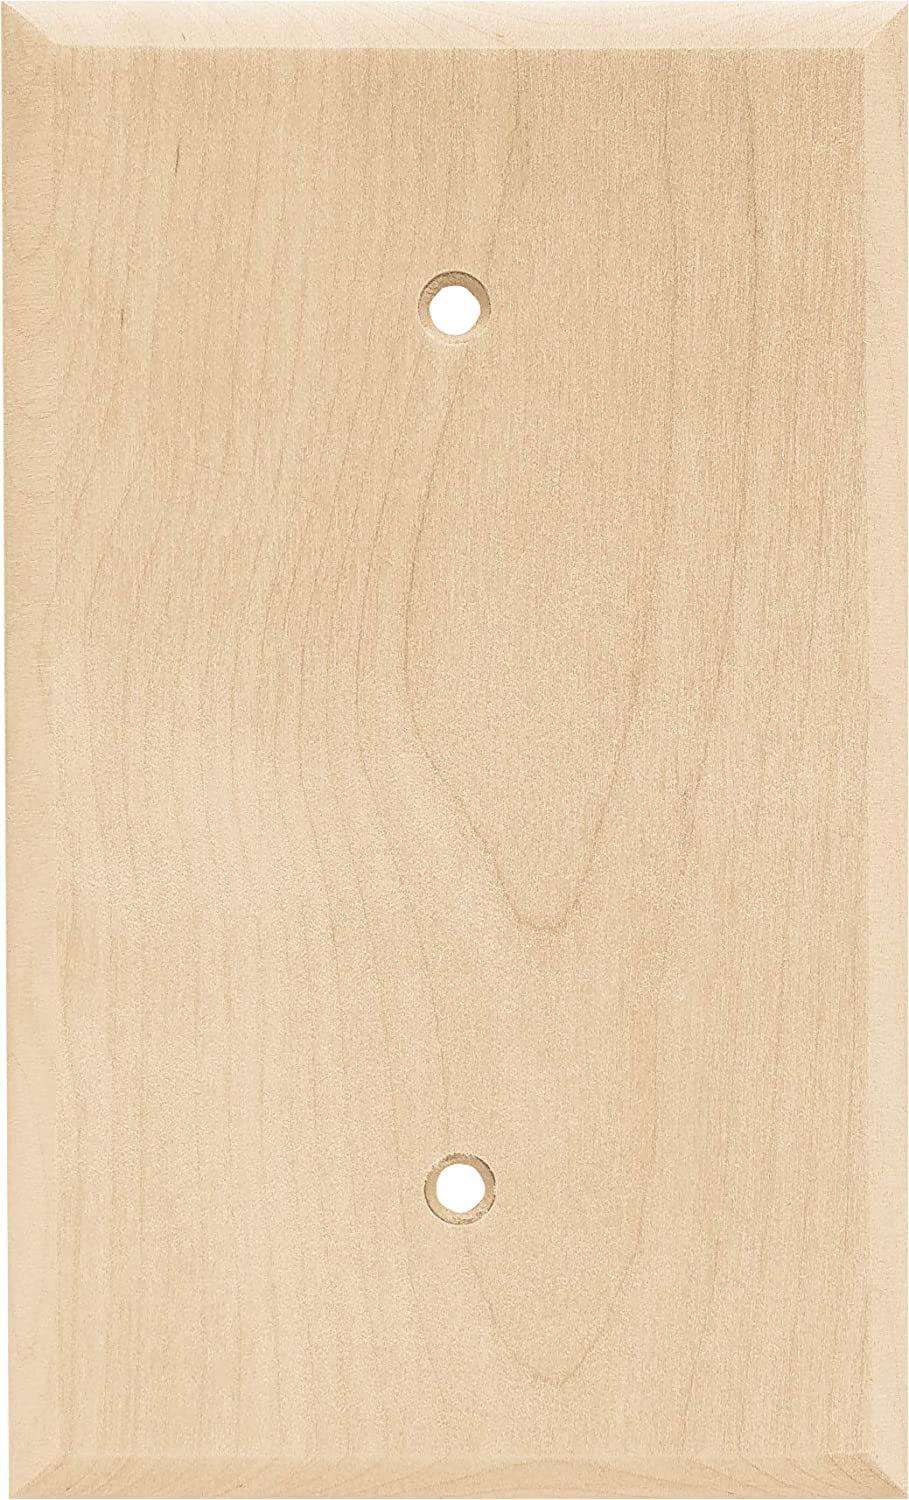 Brainerd Wood Square Smooth Brown Birch Blank Wall Plate